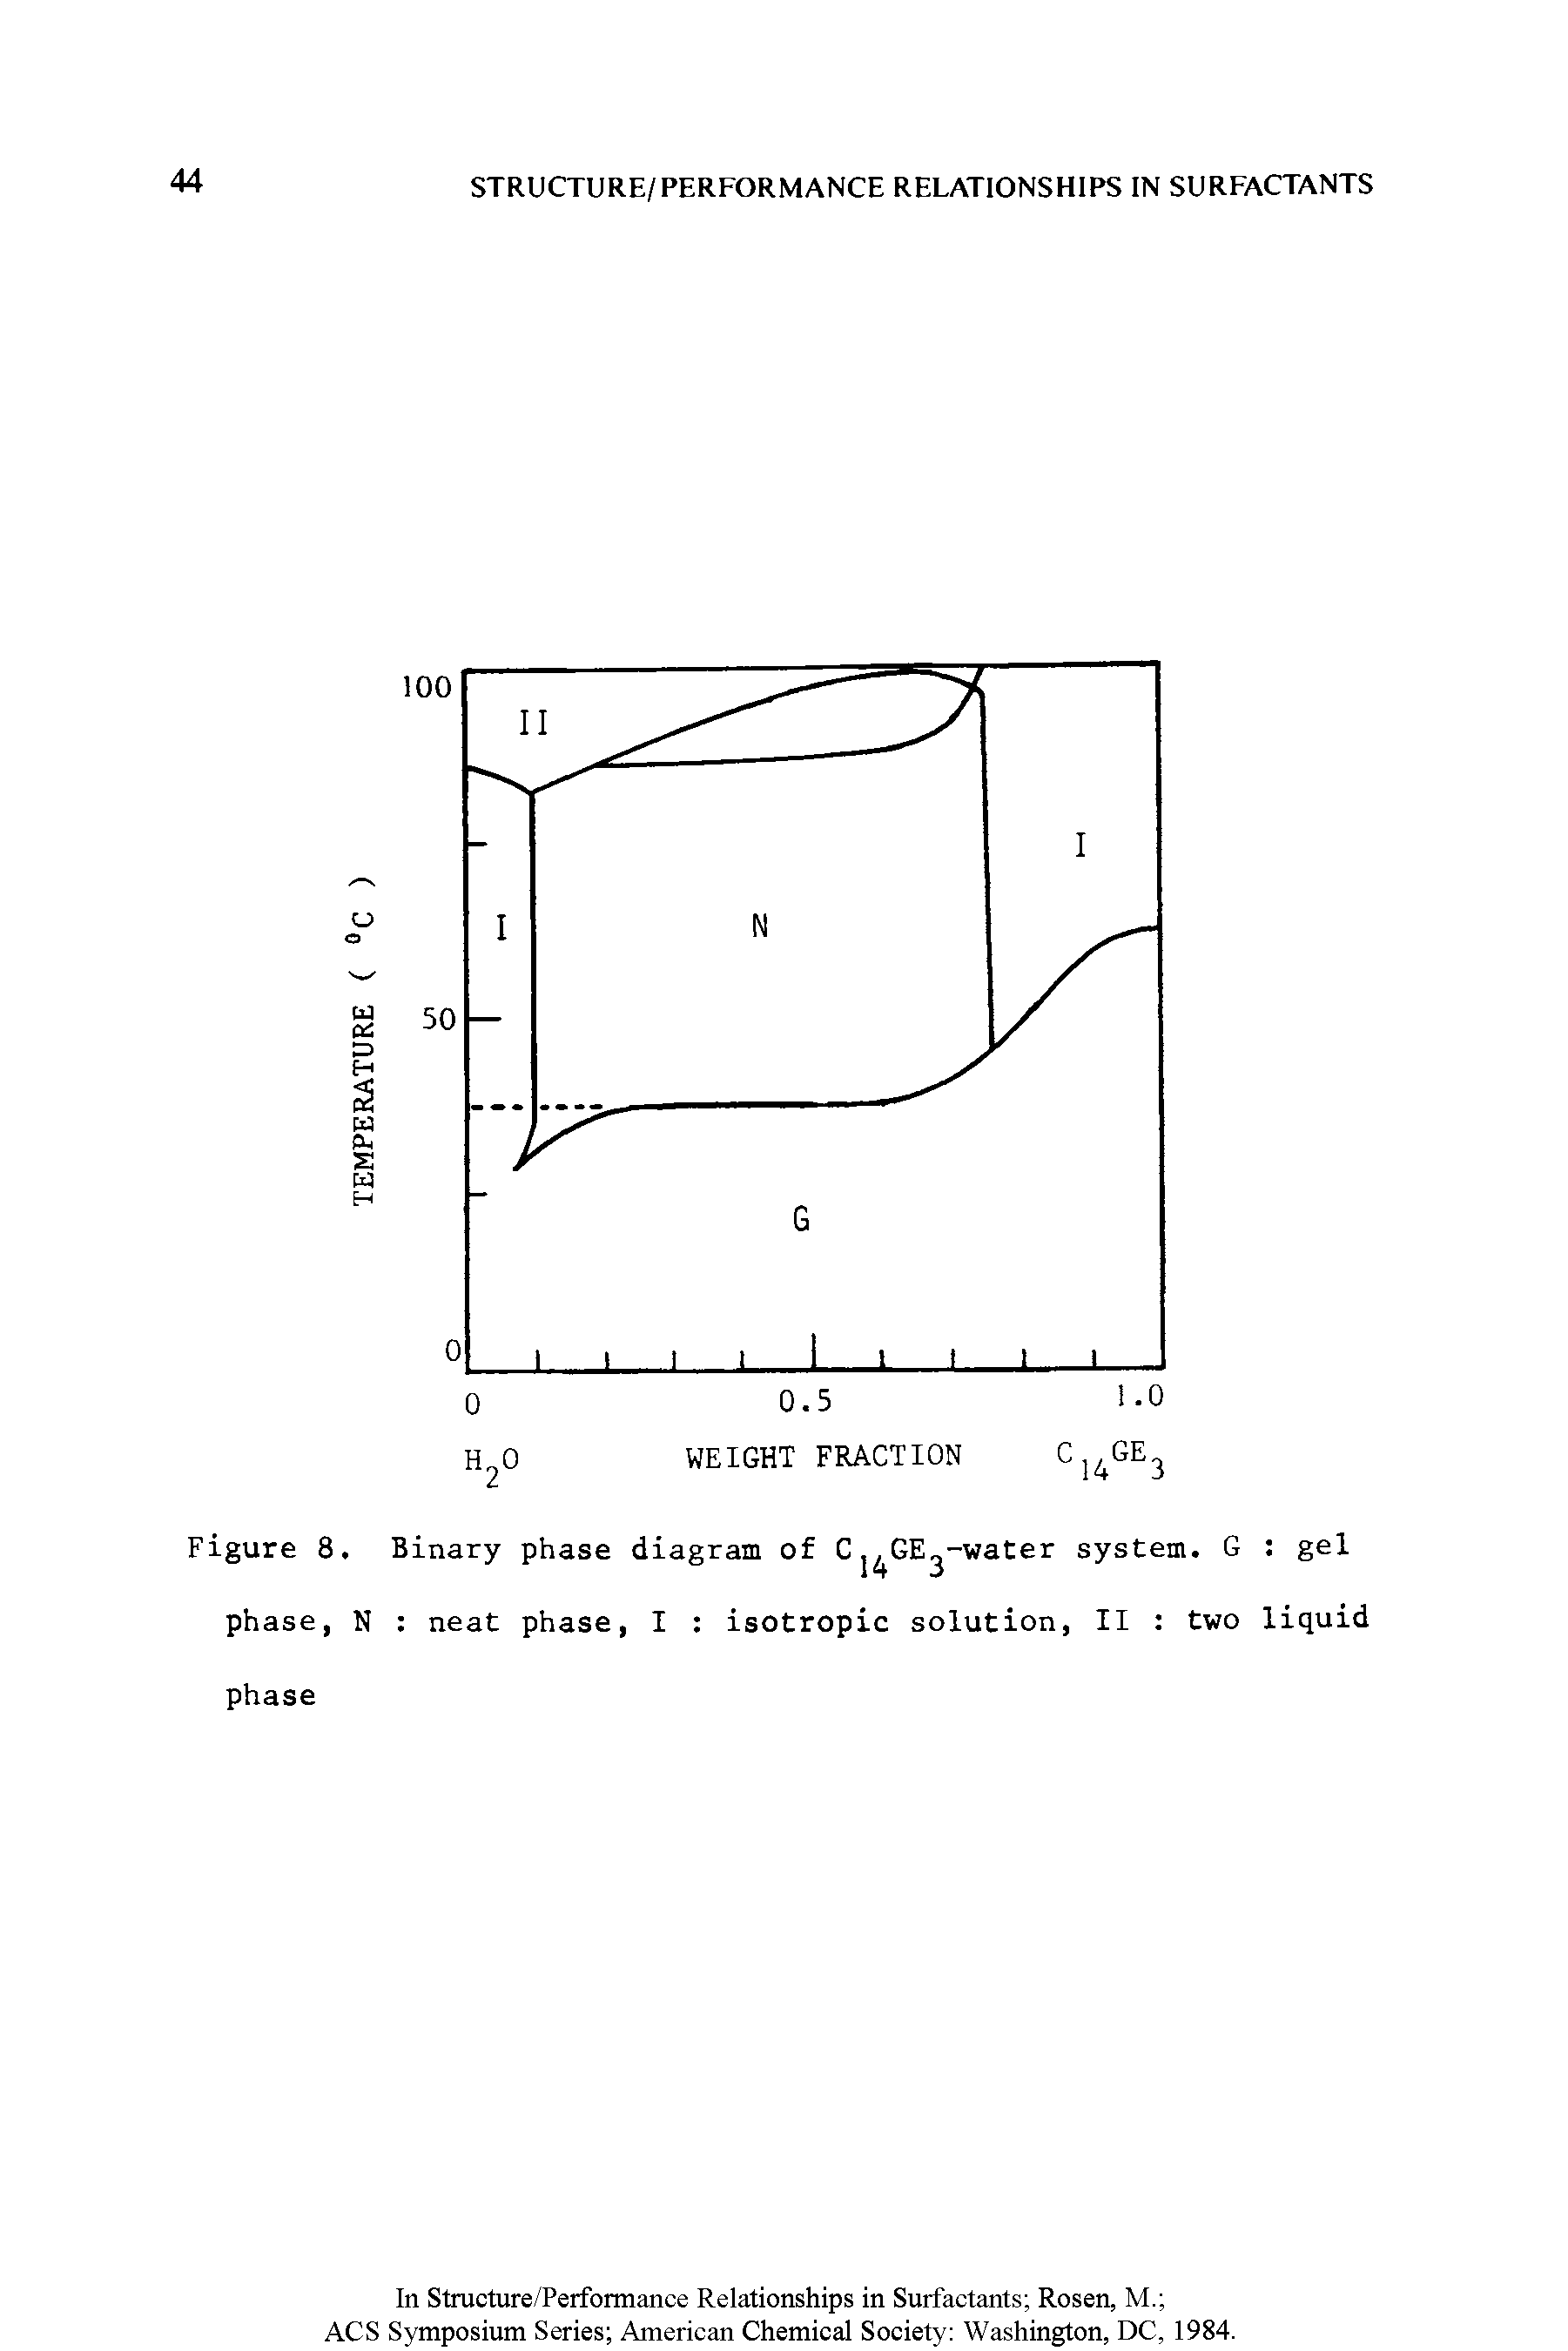 Figure 8. Binary phase diagram of Cj GE -water system. G gel phase, N neat phase, I isotropic solution, II two liquid phase...